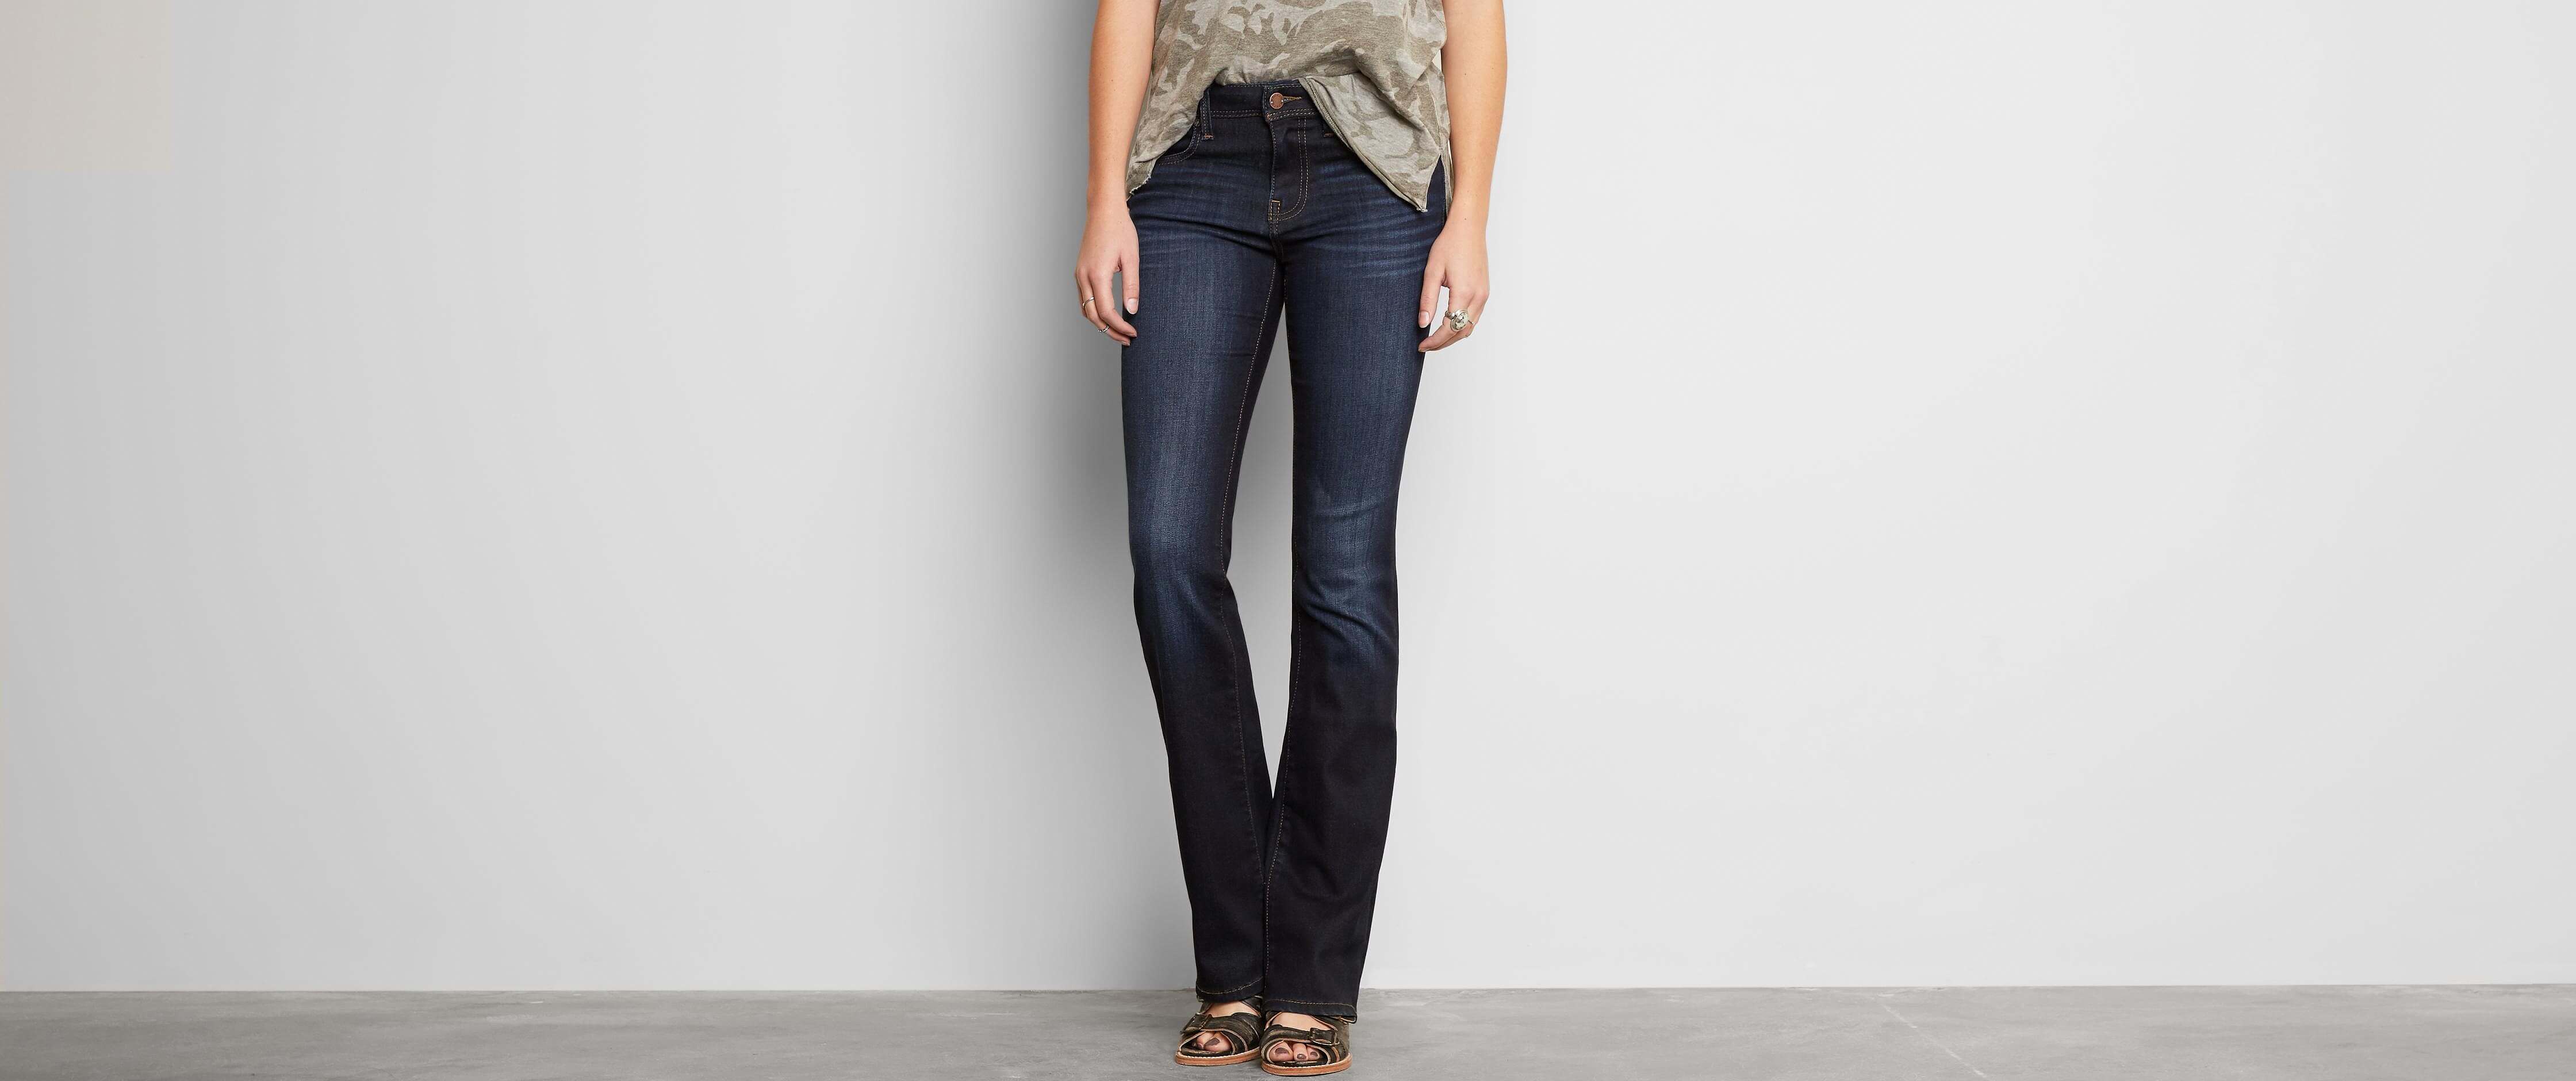 buckle womens jeans